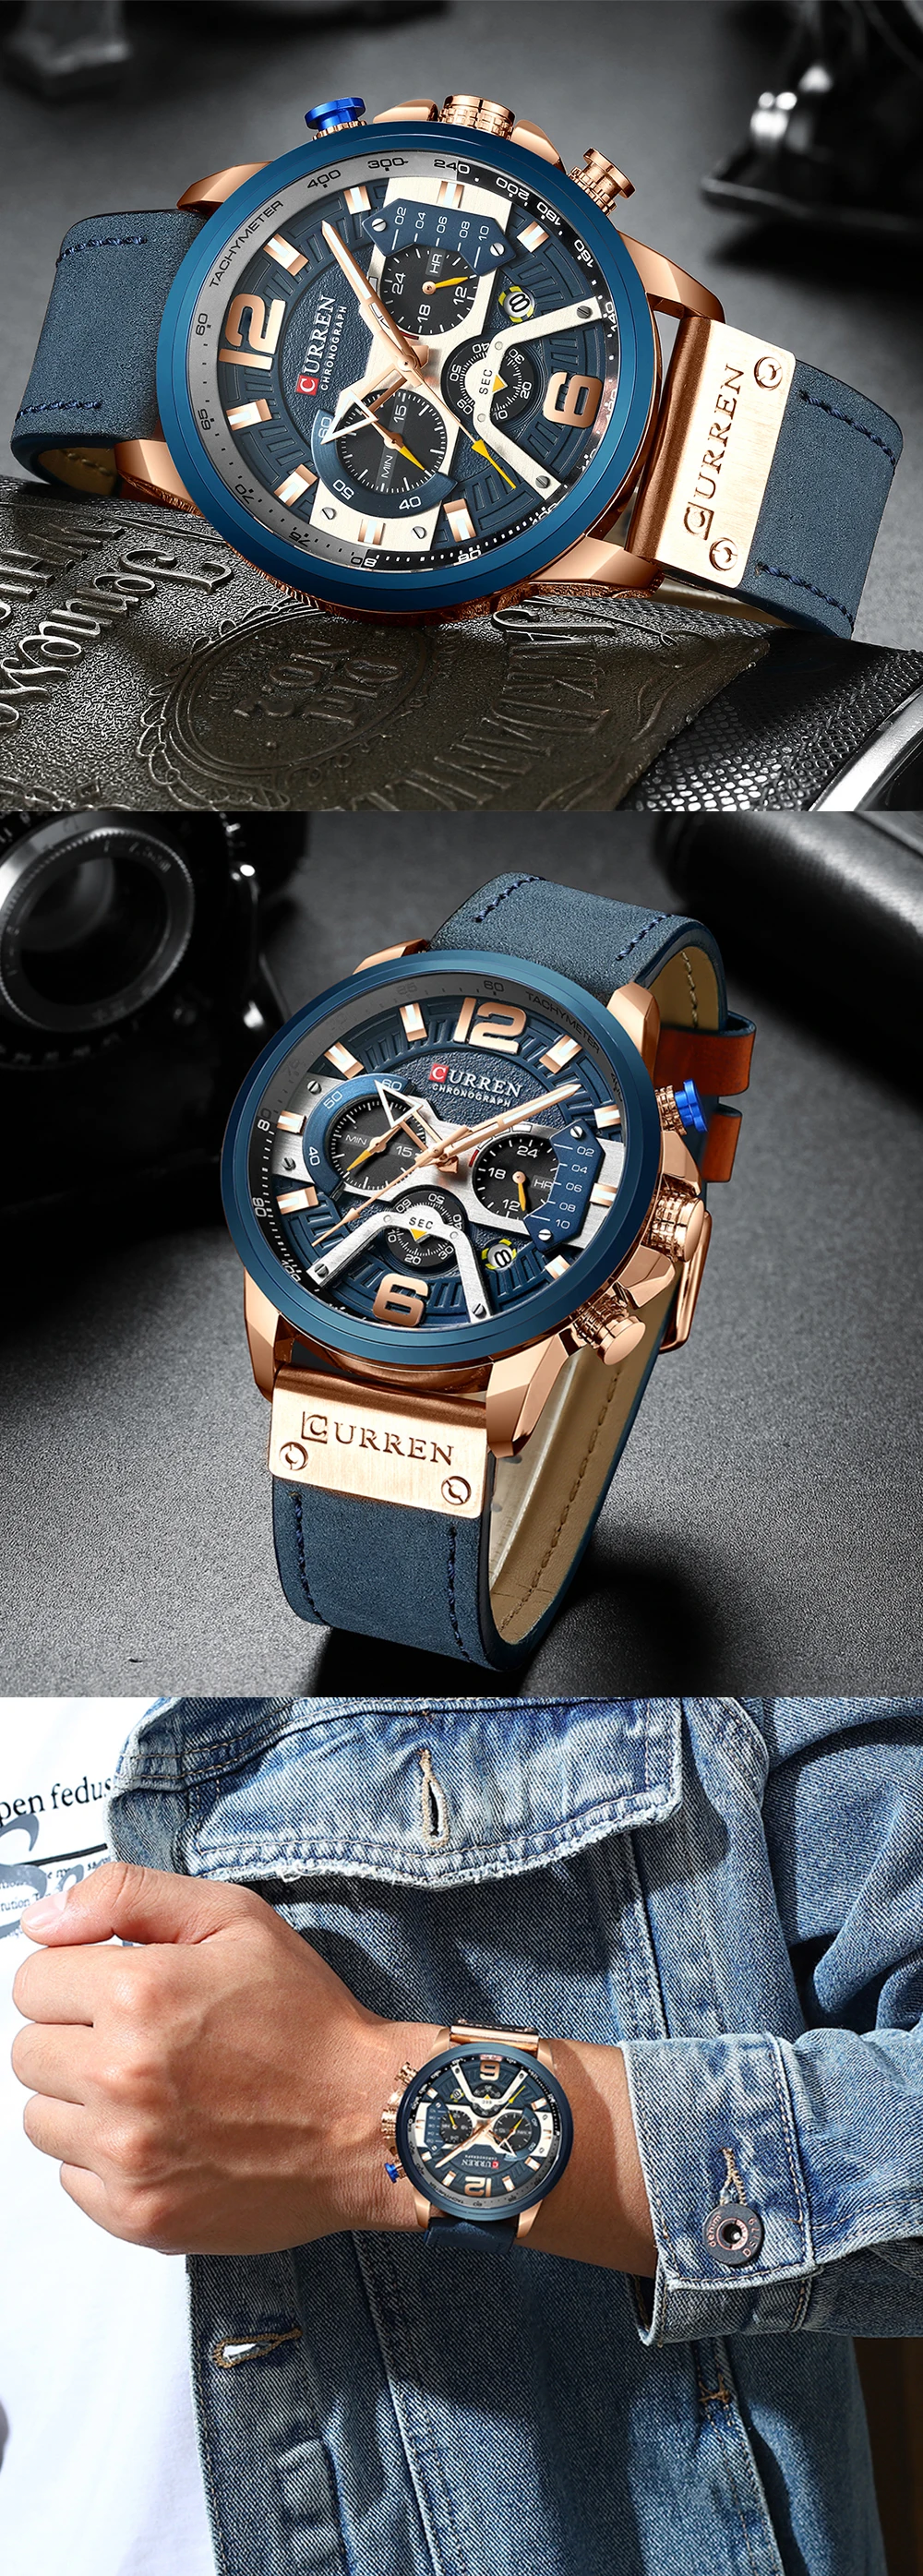 CURREN Casual Sport Watches for Men Top Luxury Brand Military Leather Wrist Watch Chronograph Wrist Watch